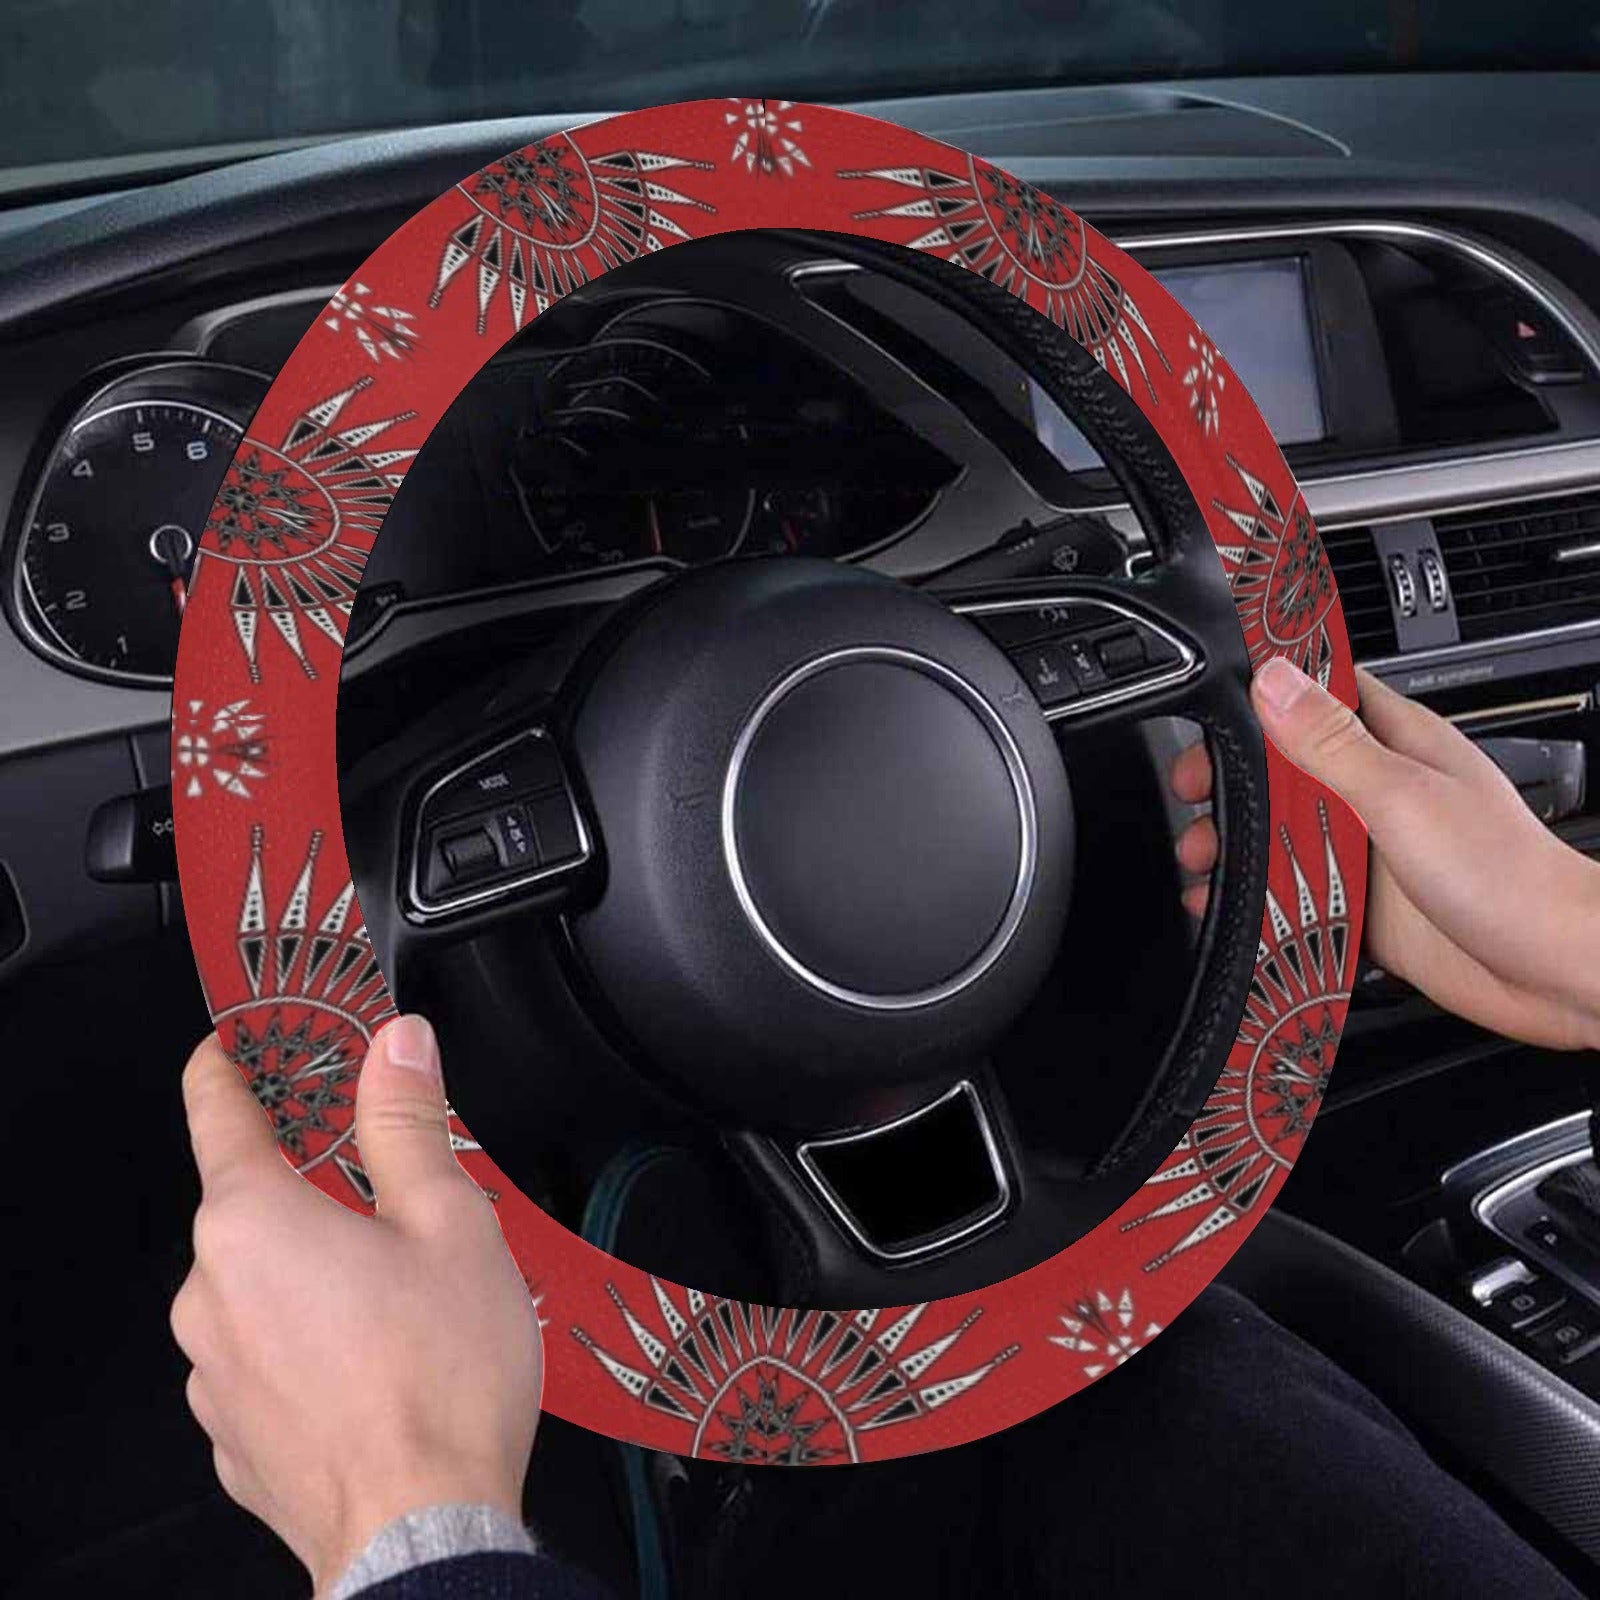 Evening Feather Wheel Blush Steering Wheel Cover with Elastic Edge